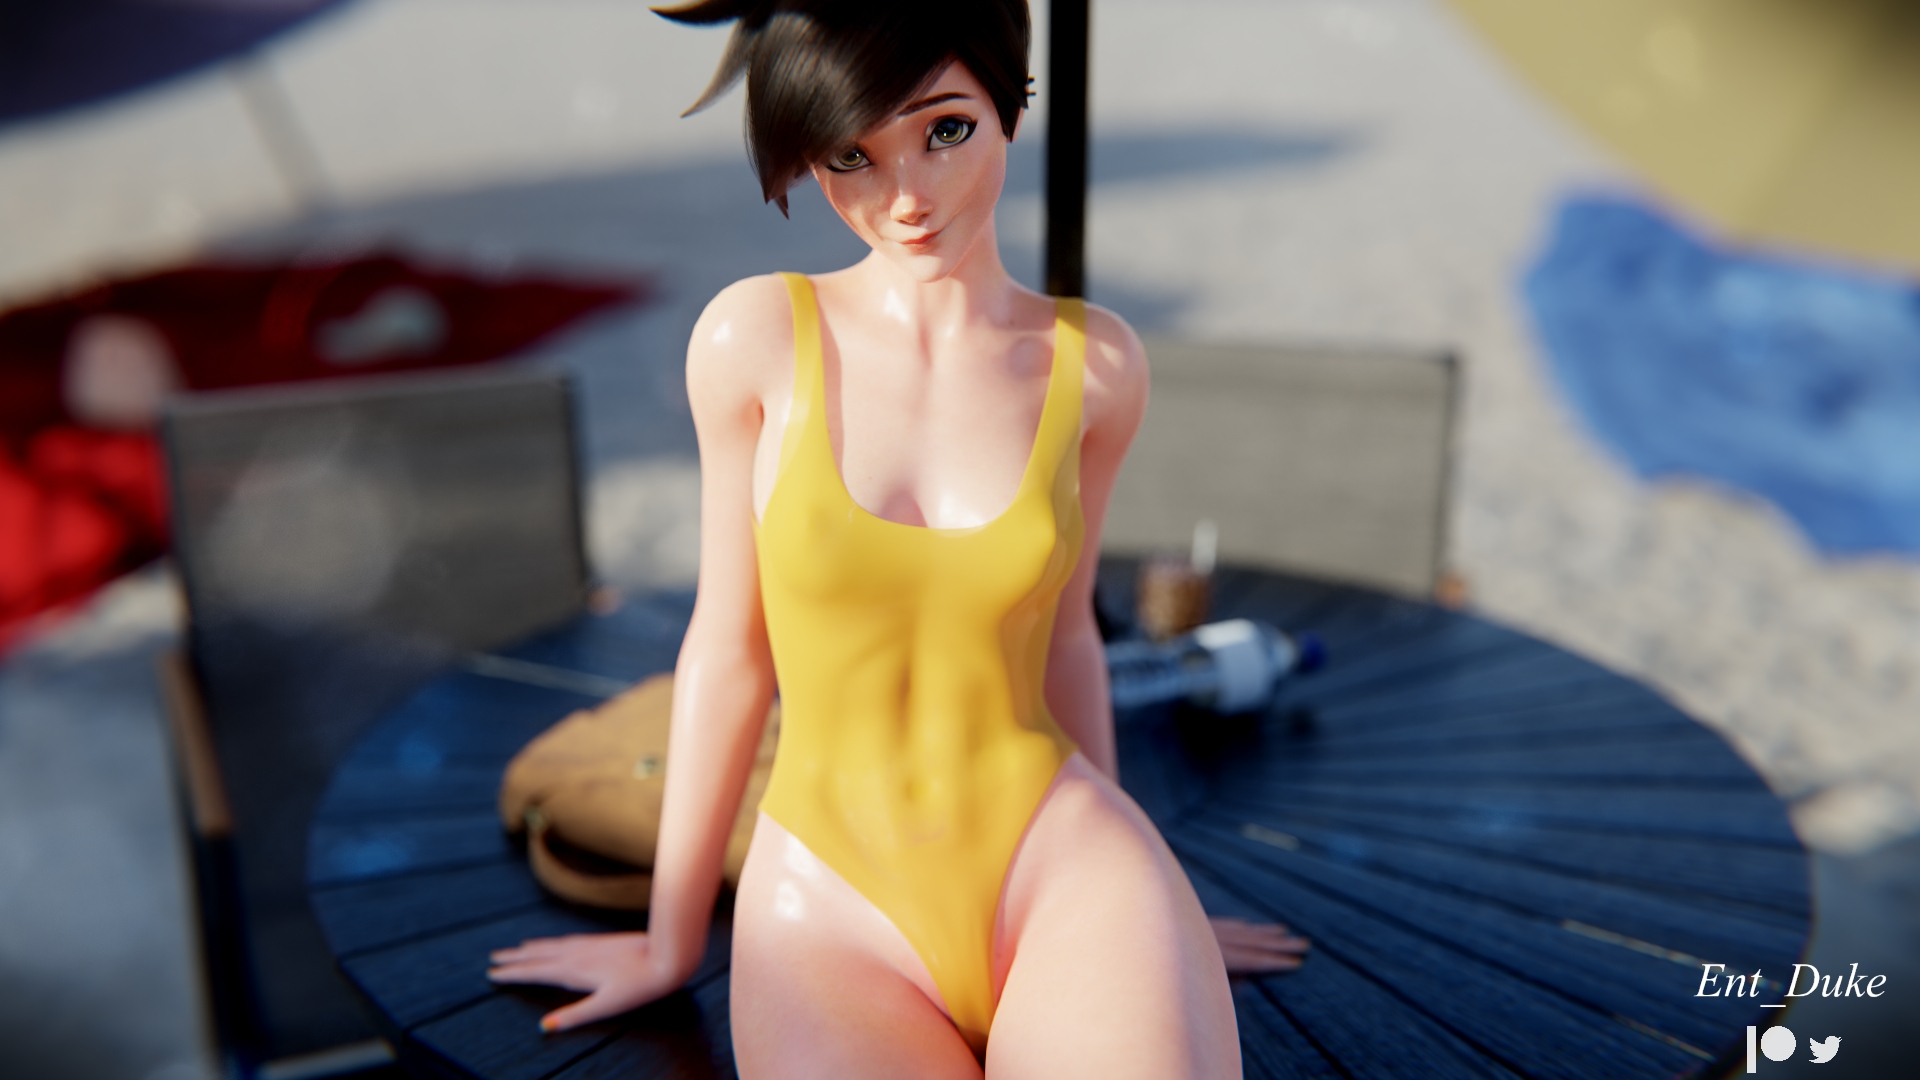 Tracer awaits Tracer Overwatch 3d Porn Videogame Nude Pose Posing Beach Natural Boobs